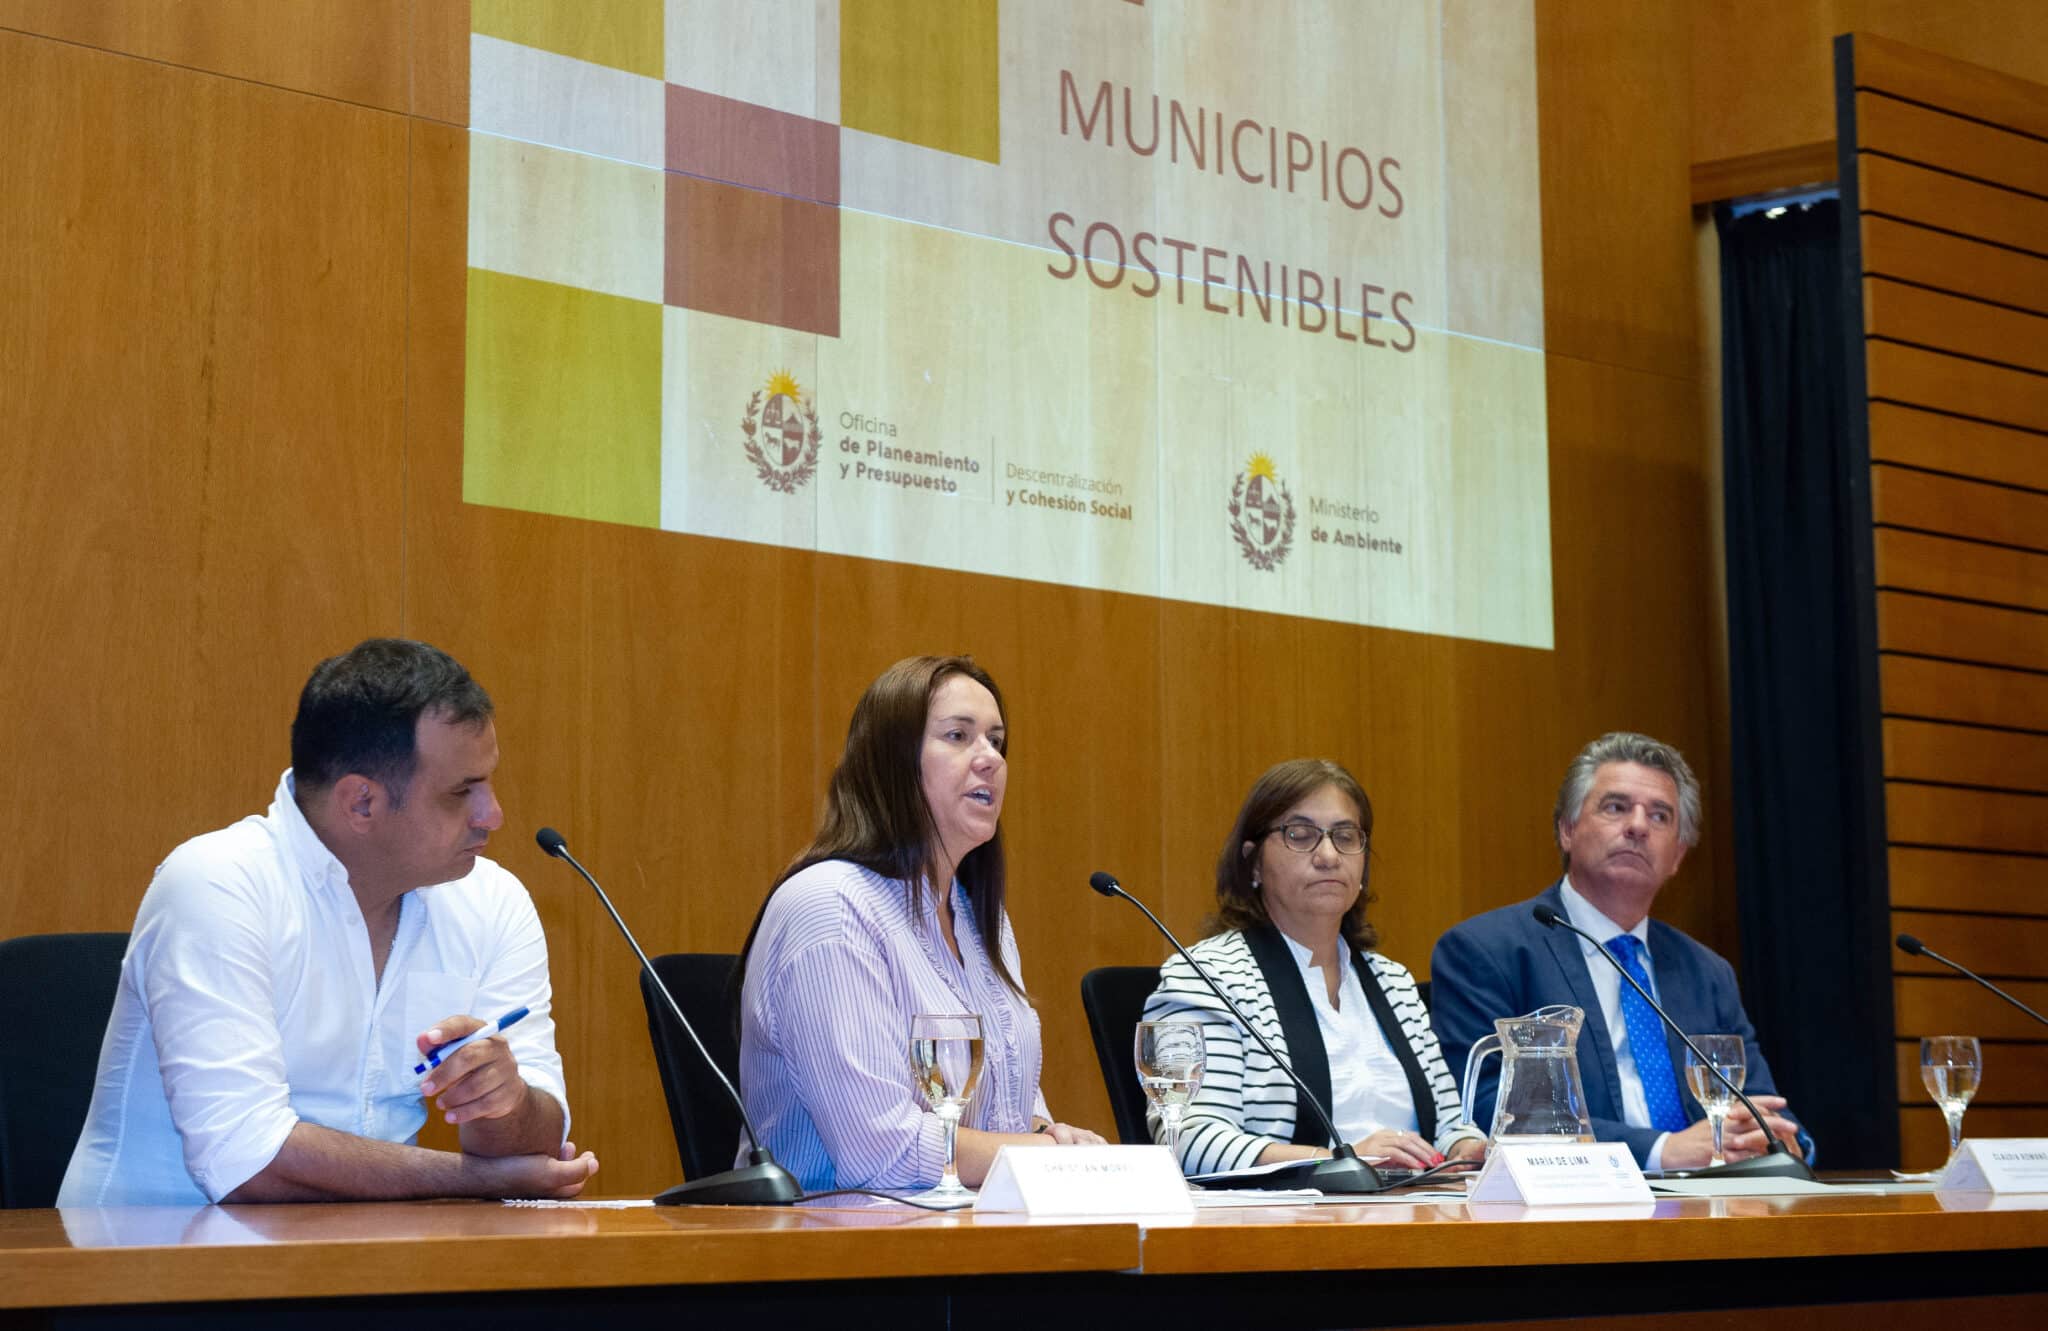 The Sustainable Municipalities program was presented at Torre Ejecutiva